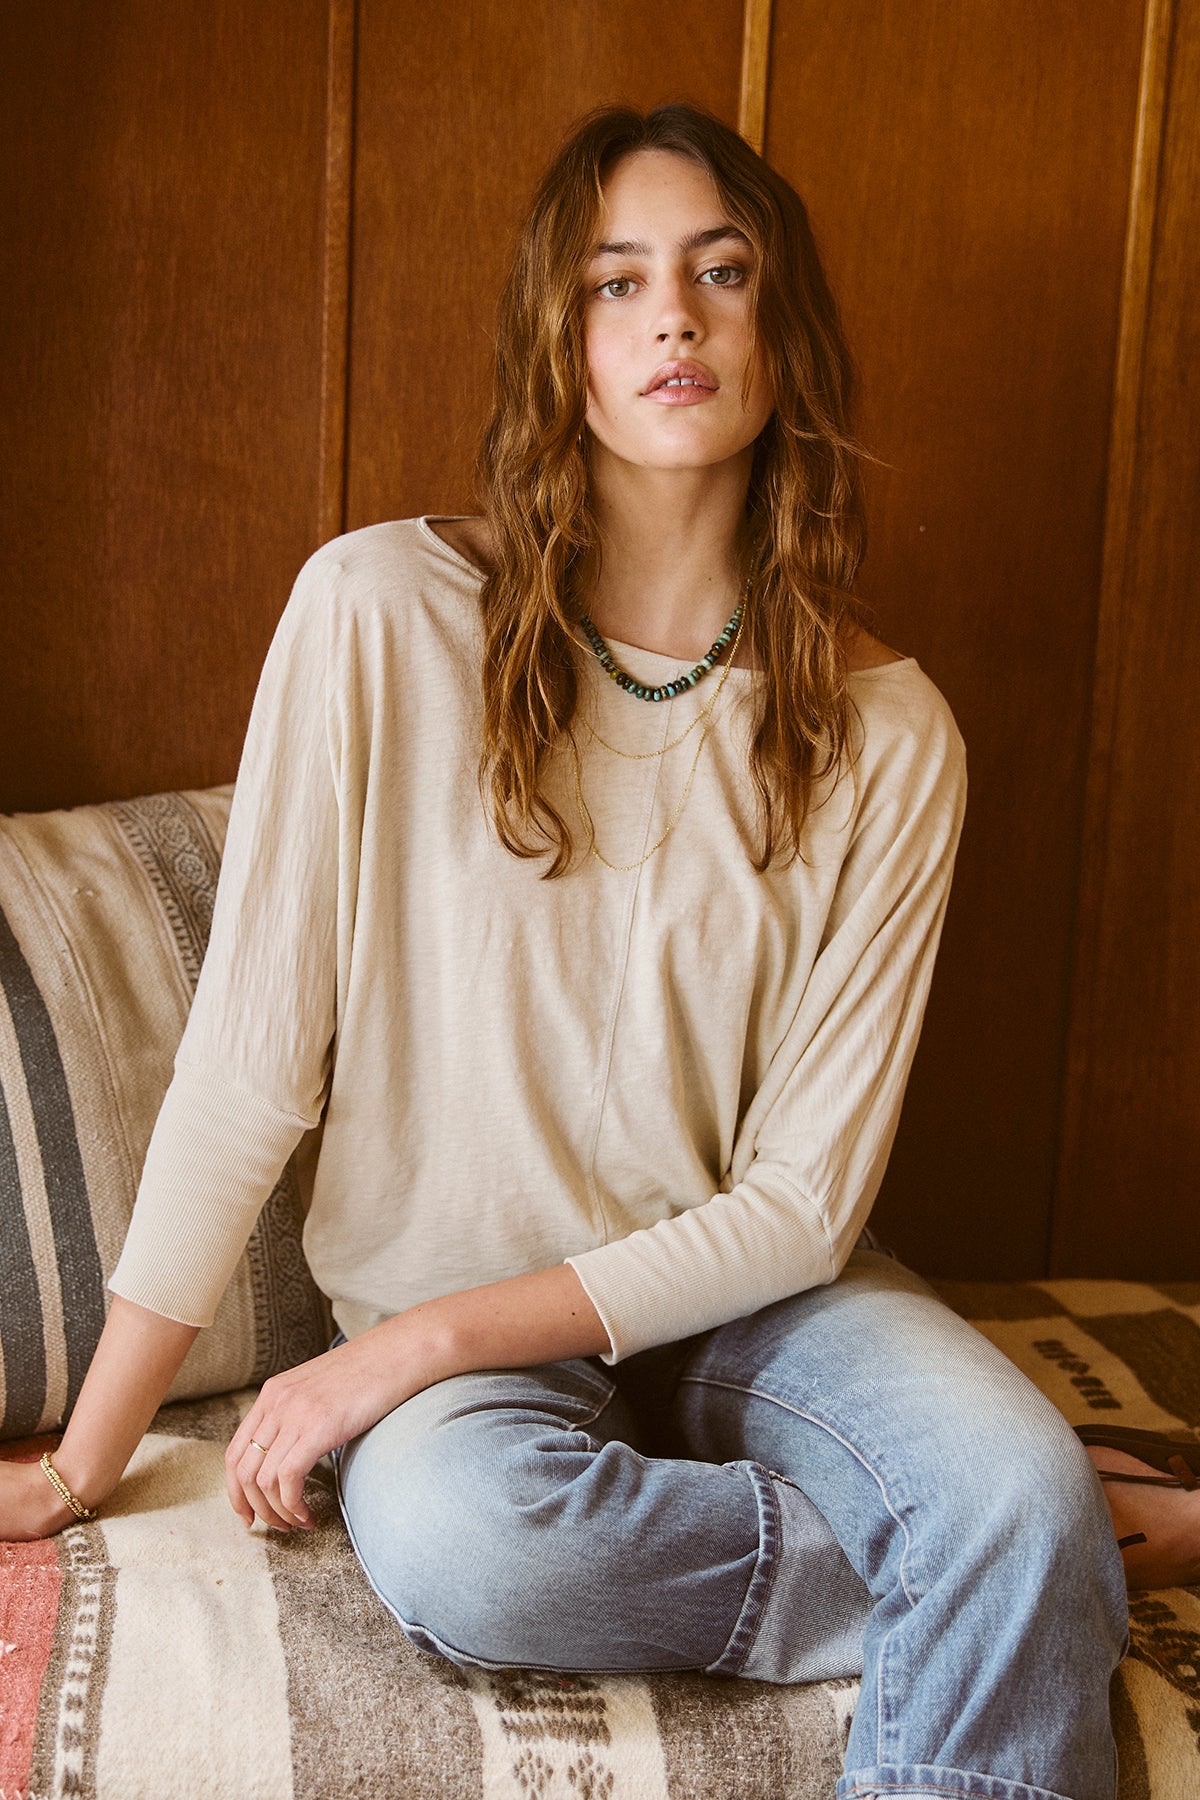 A woman sitting on a couch wearing JOSS DOLMAN SLEEVE TEE by Velvet by Graham & Spencer, jeans, and a beaded necklace-35206719373505